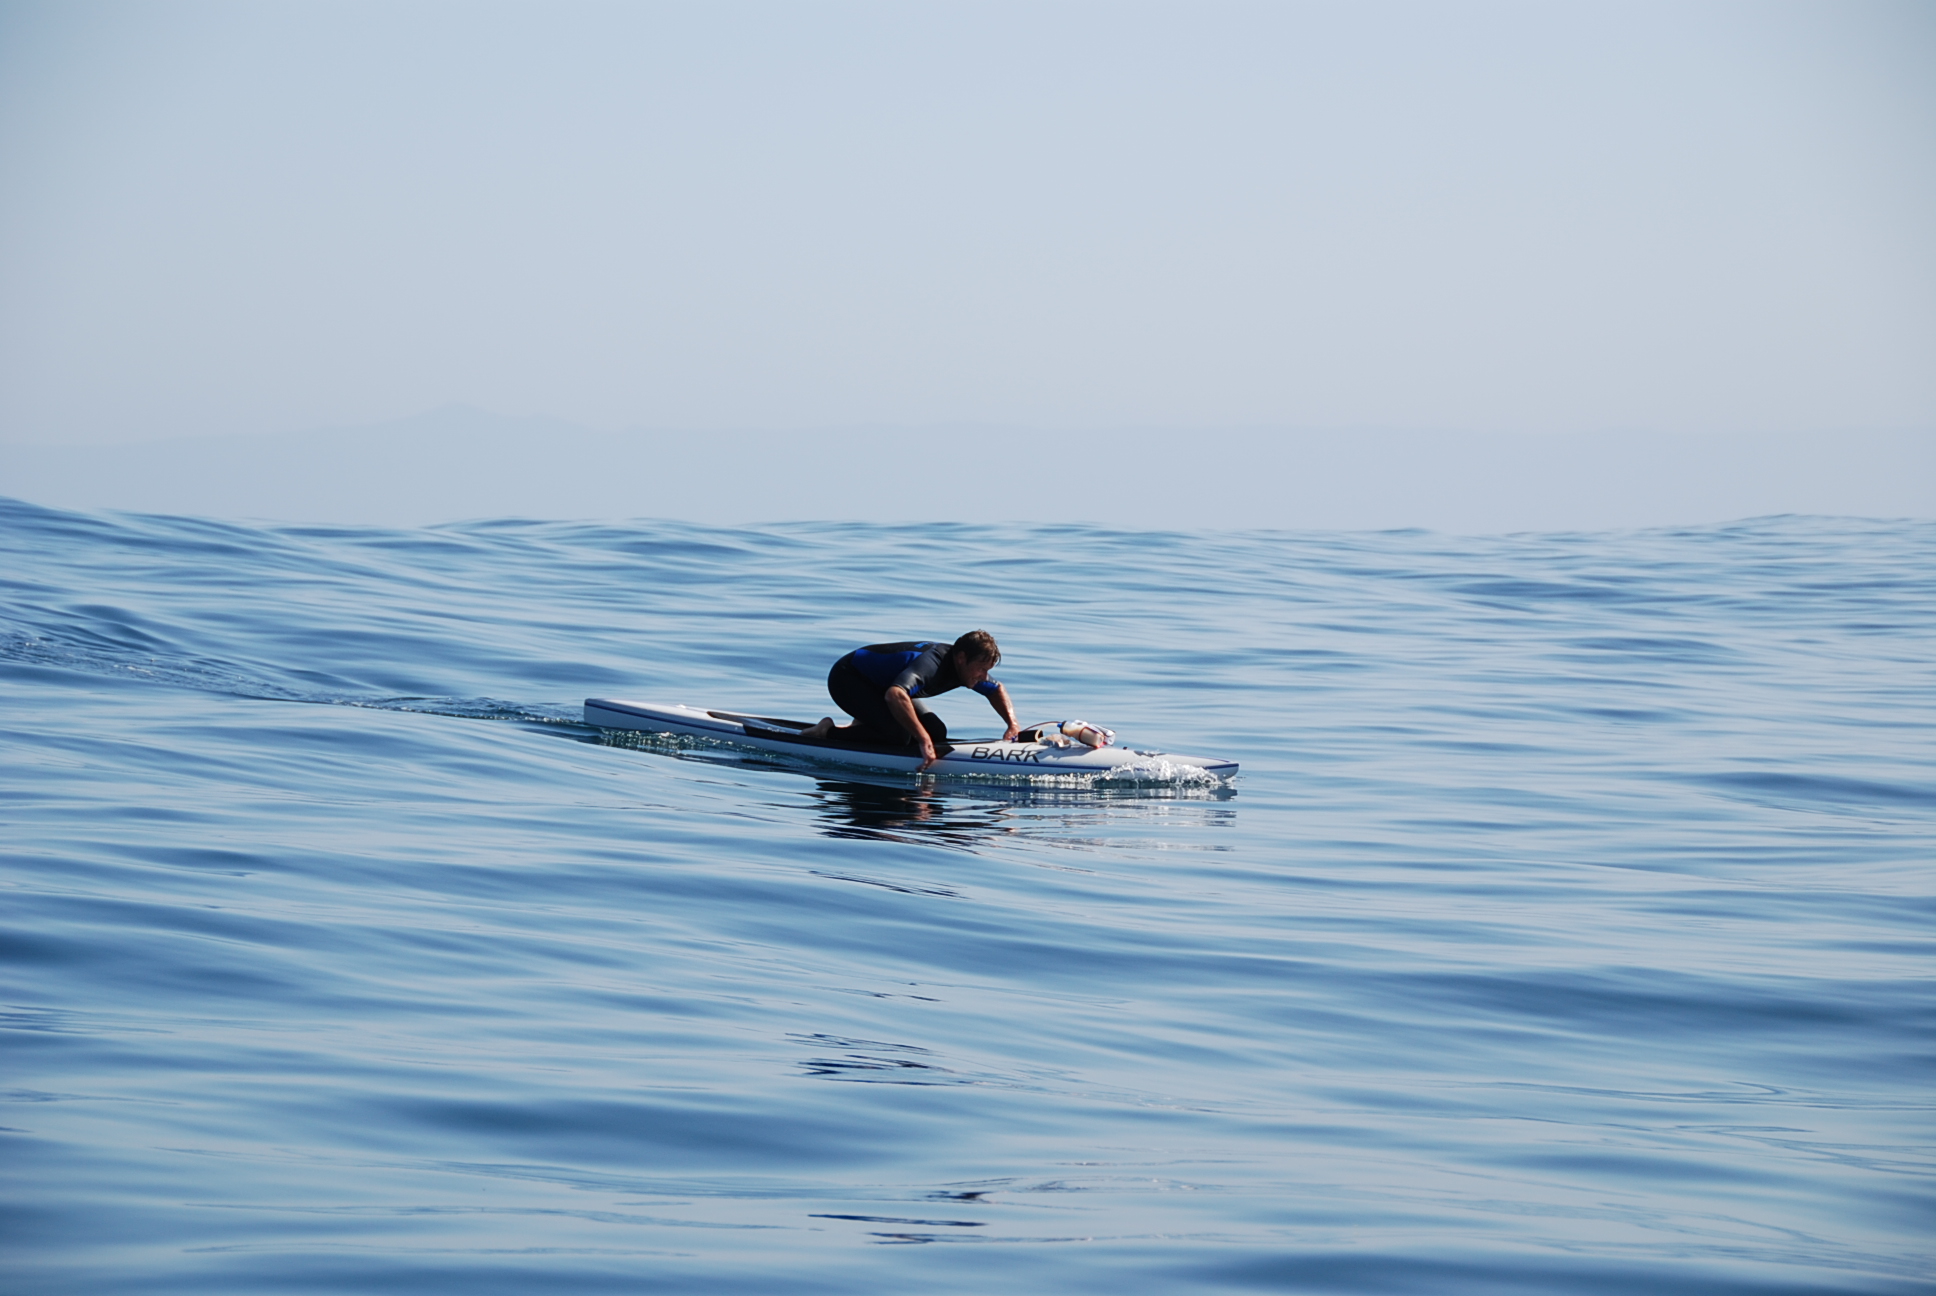 This Ocean Life, Episode 2 - Mike Dilloughery and the 55-mile Unassisted Paddle